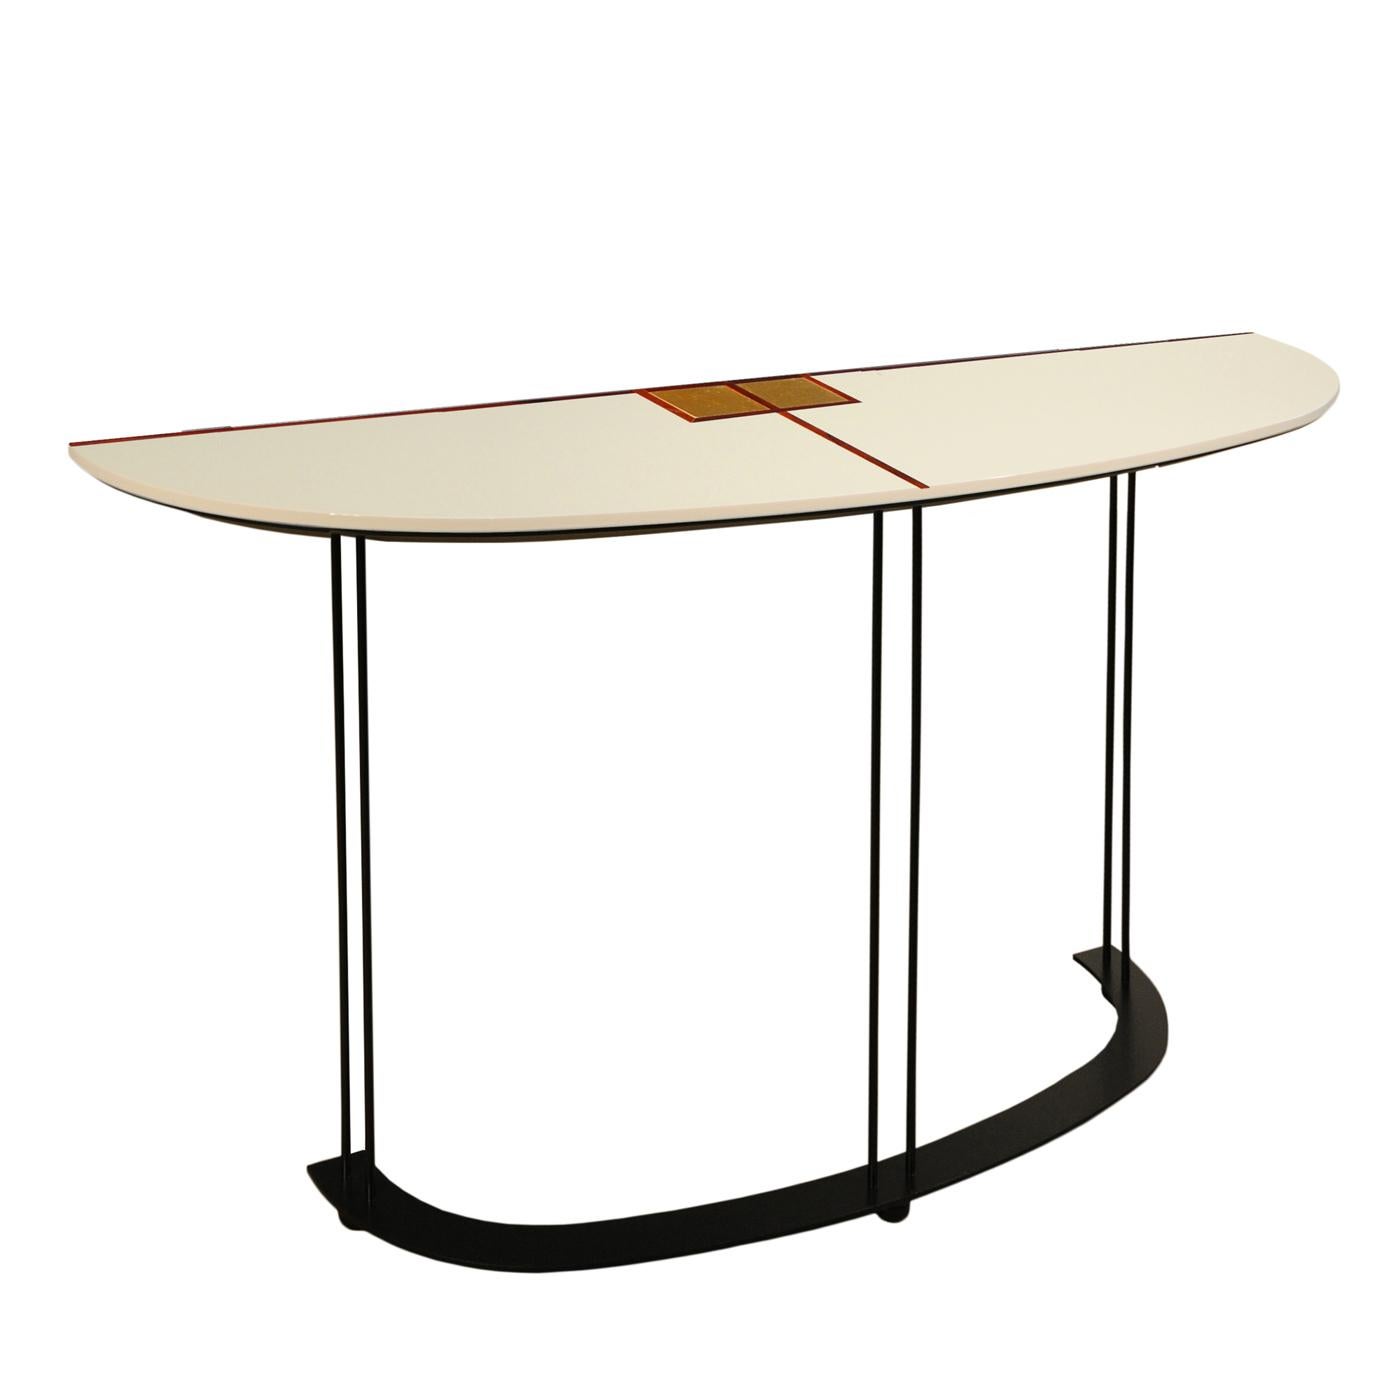 This delicate and refined console is an exquisite example of contemporary sophistication. Boasting a unique structure made of metal with a matte black powder finish and comprising three pairs of legs sustained by a demilune shaped base support, the